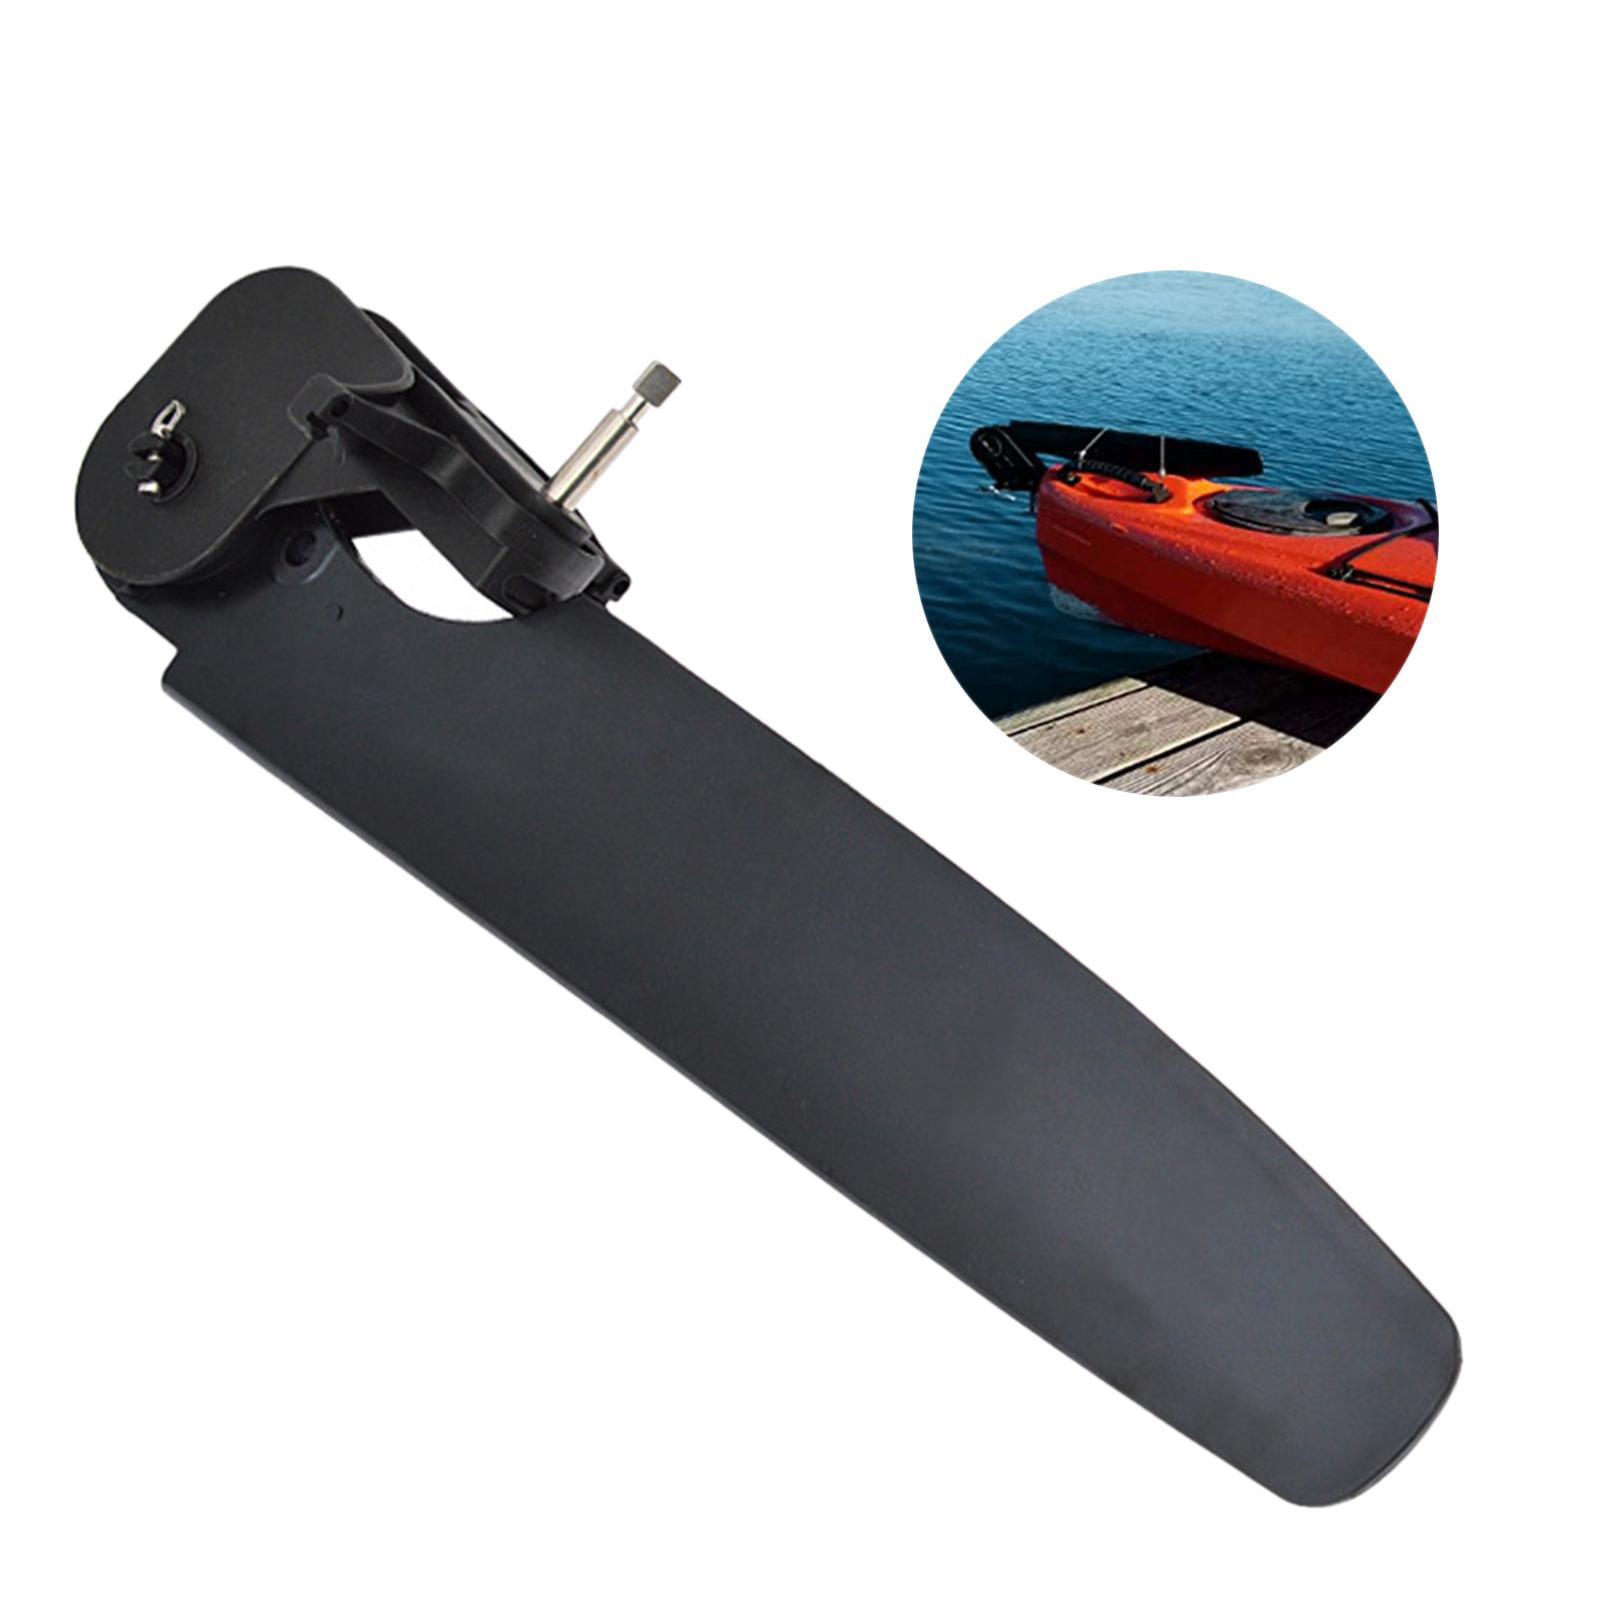 Fixation Rear Tail Rudder Equipment Sturdy Kit for Kayak Canoe Control Direction 